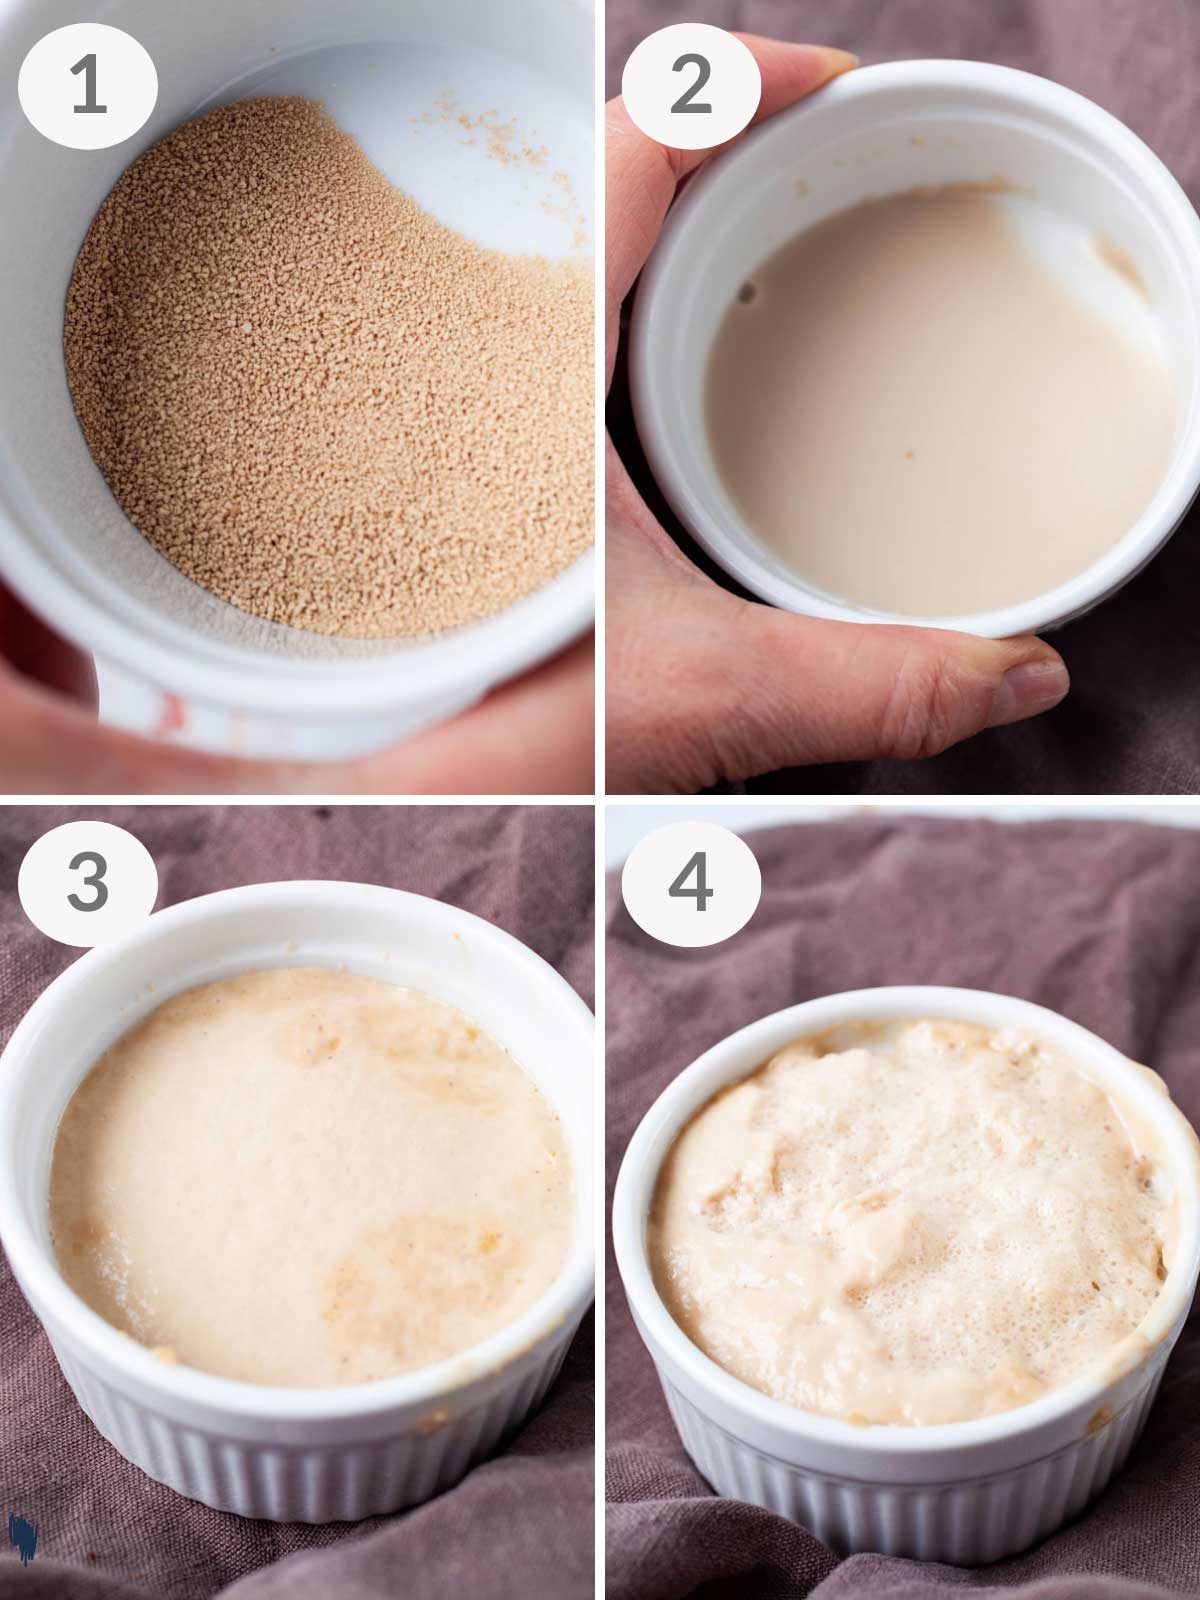 A series of steps showing how to activate dry yeast.